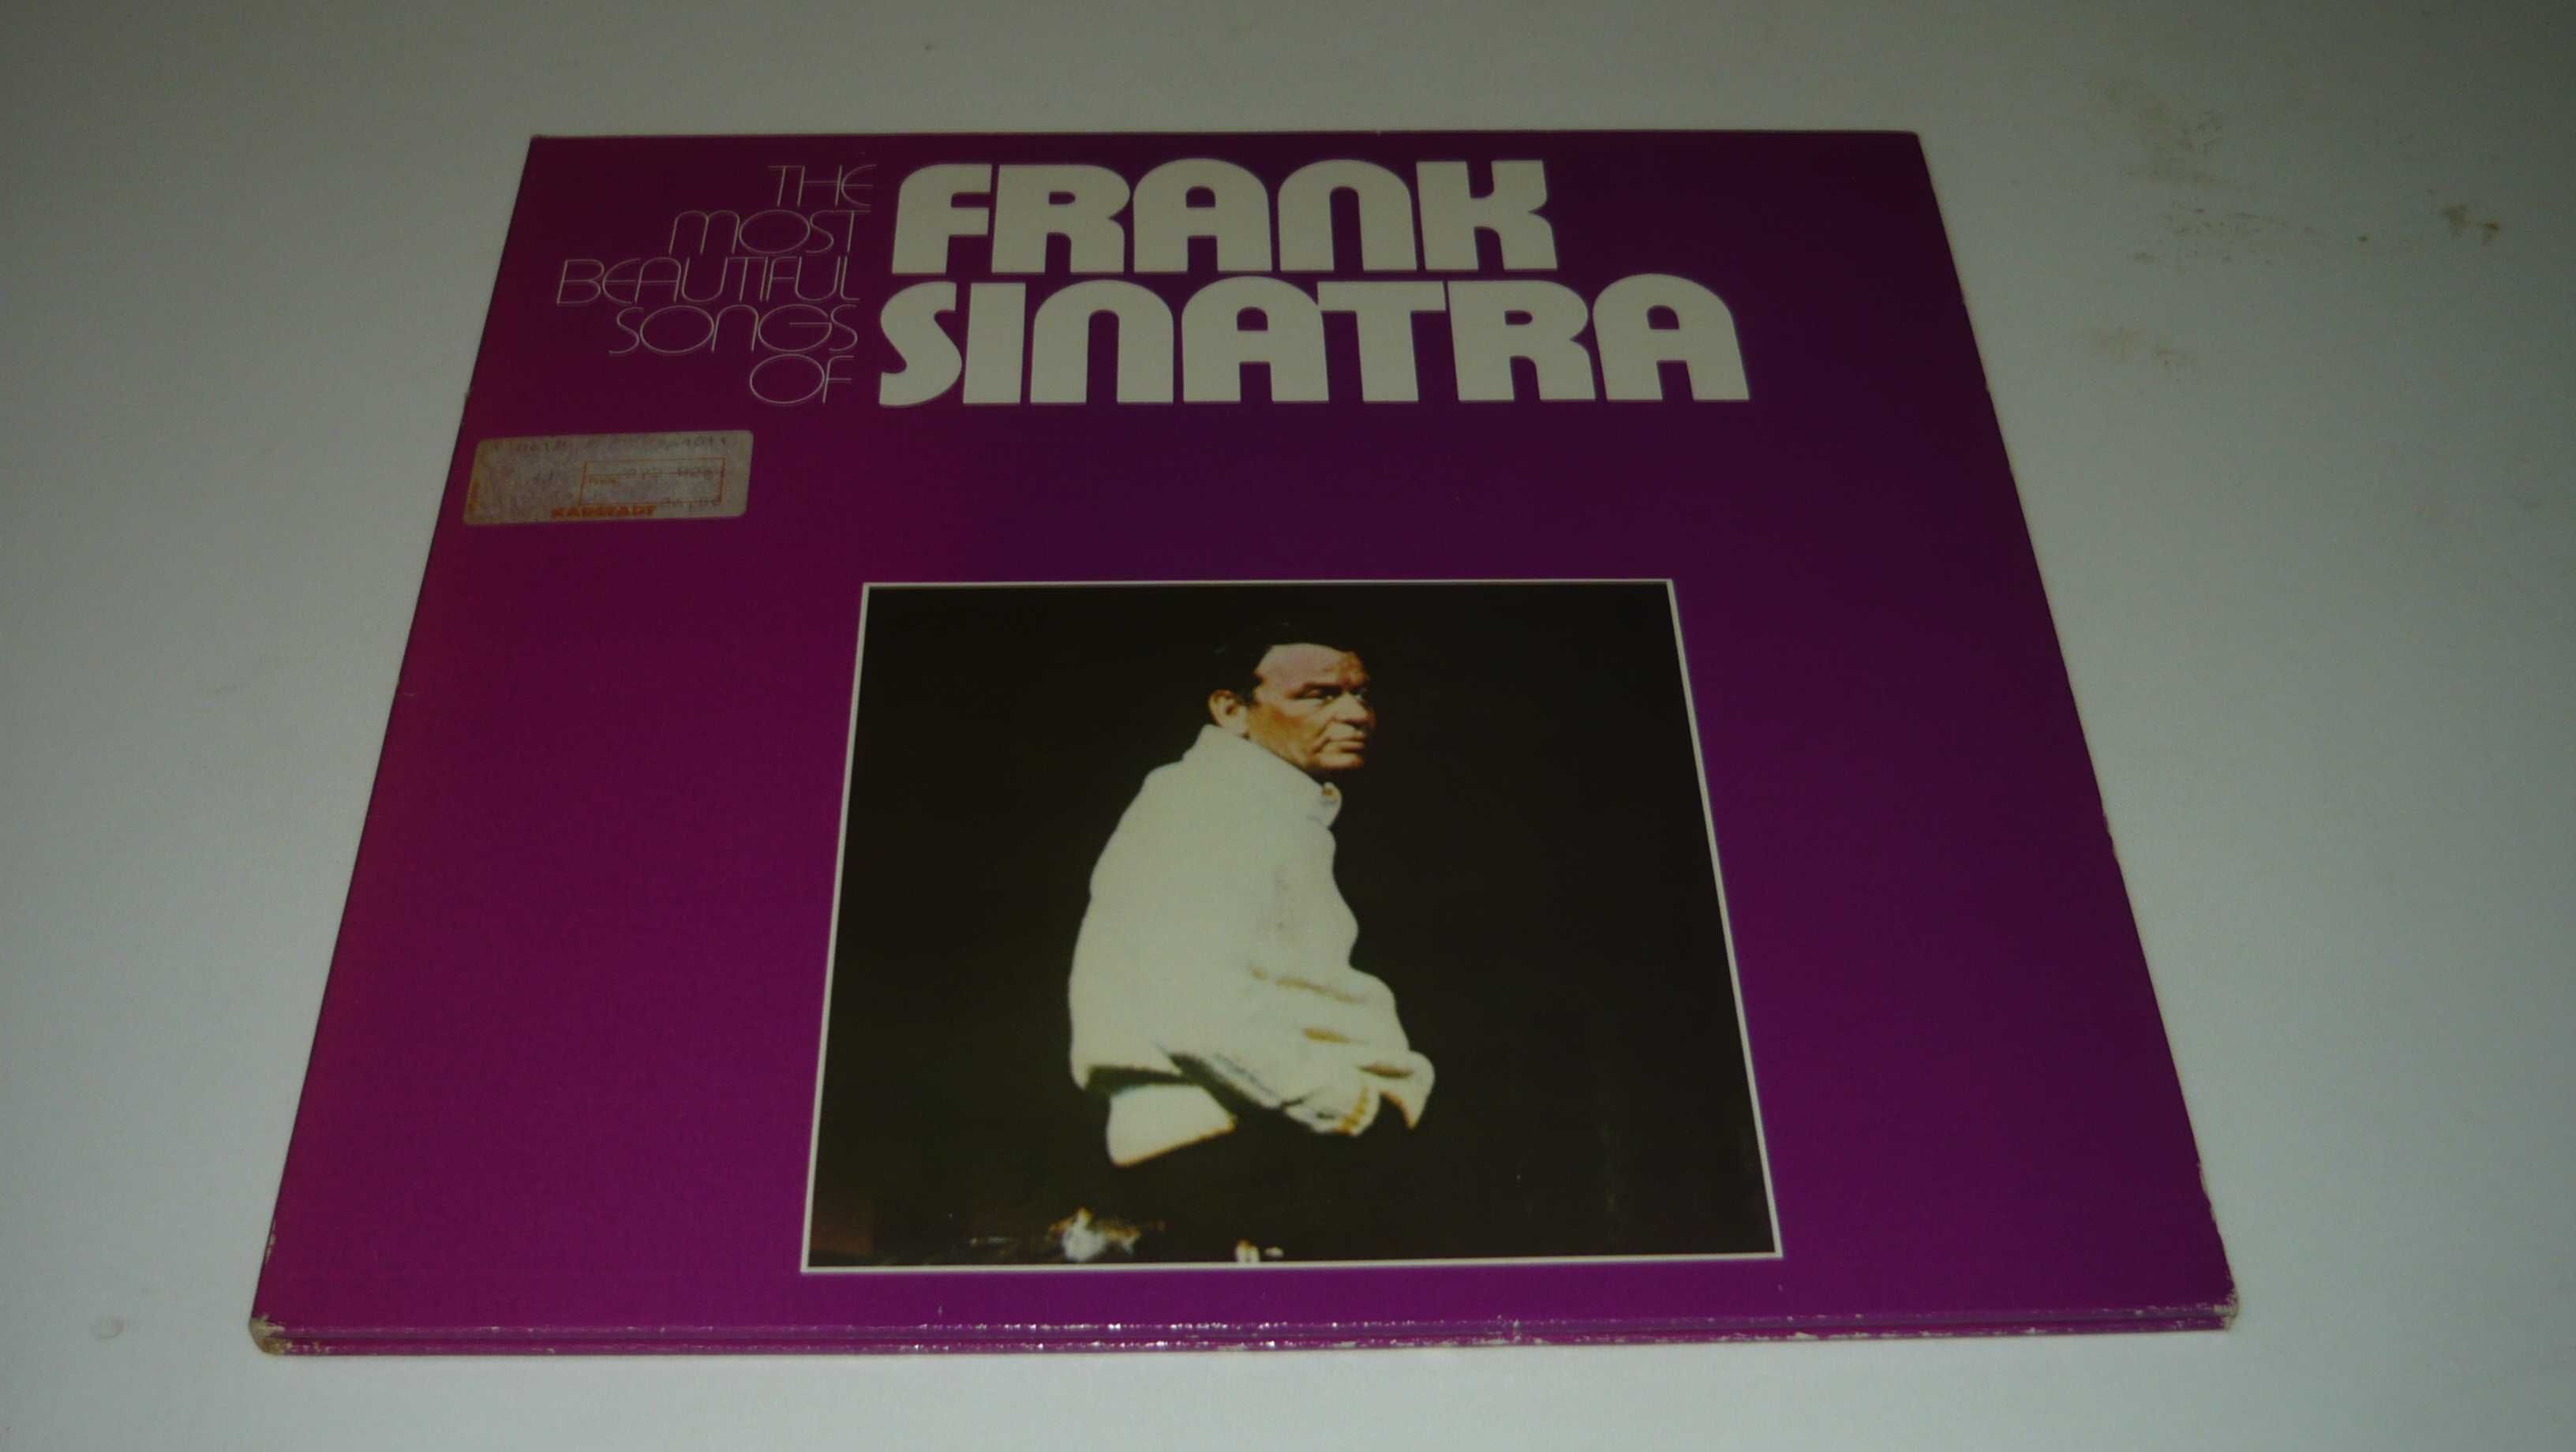 Frank Sinatra The most beautiful songs of 2  LP